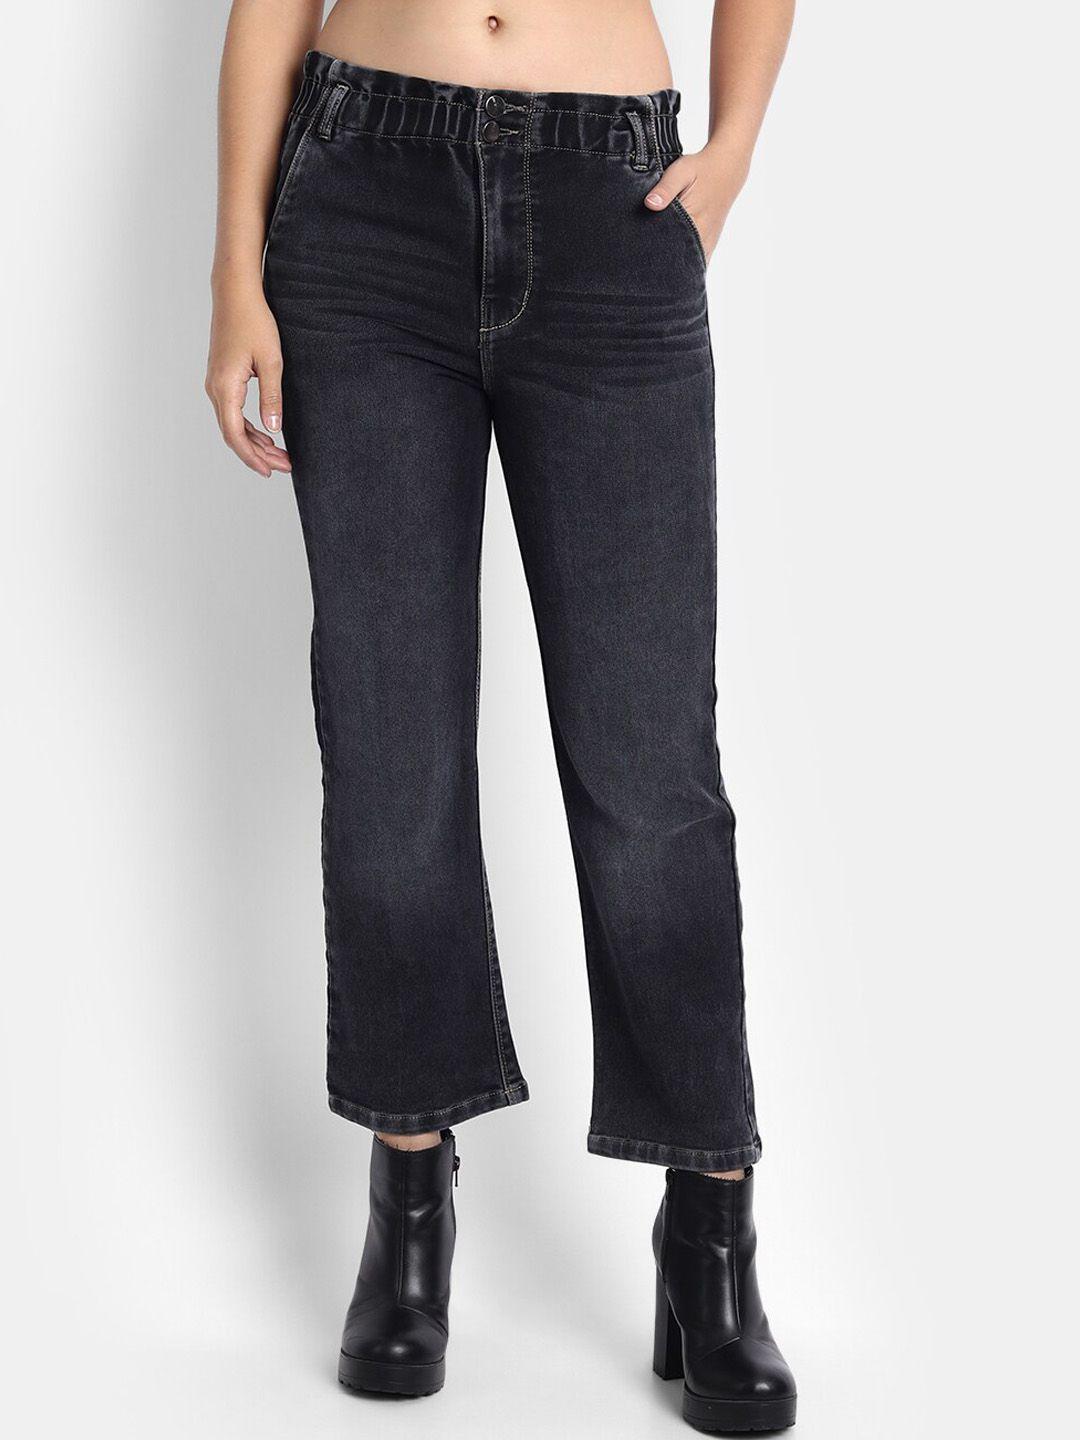 next one women black slim fit high-rise light fade stretchable jeans